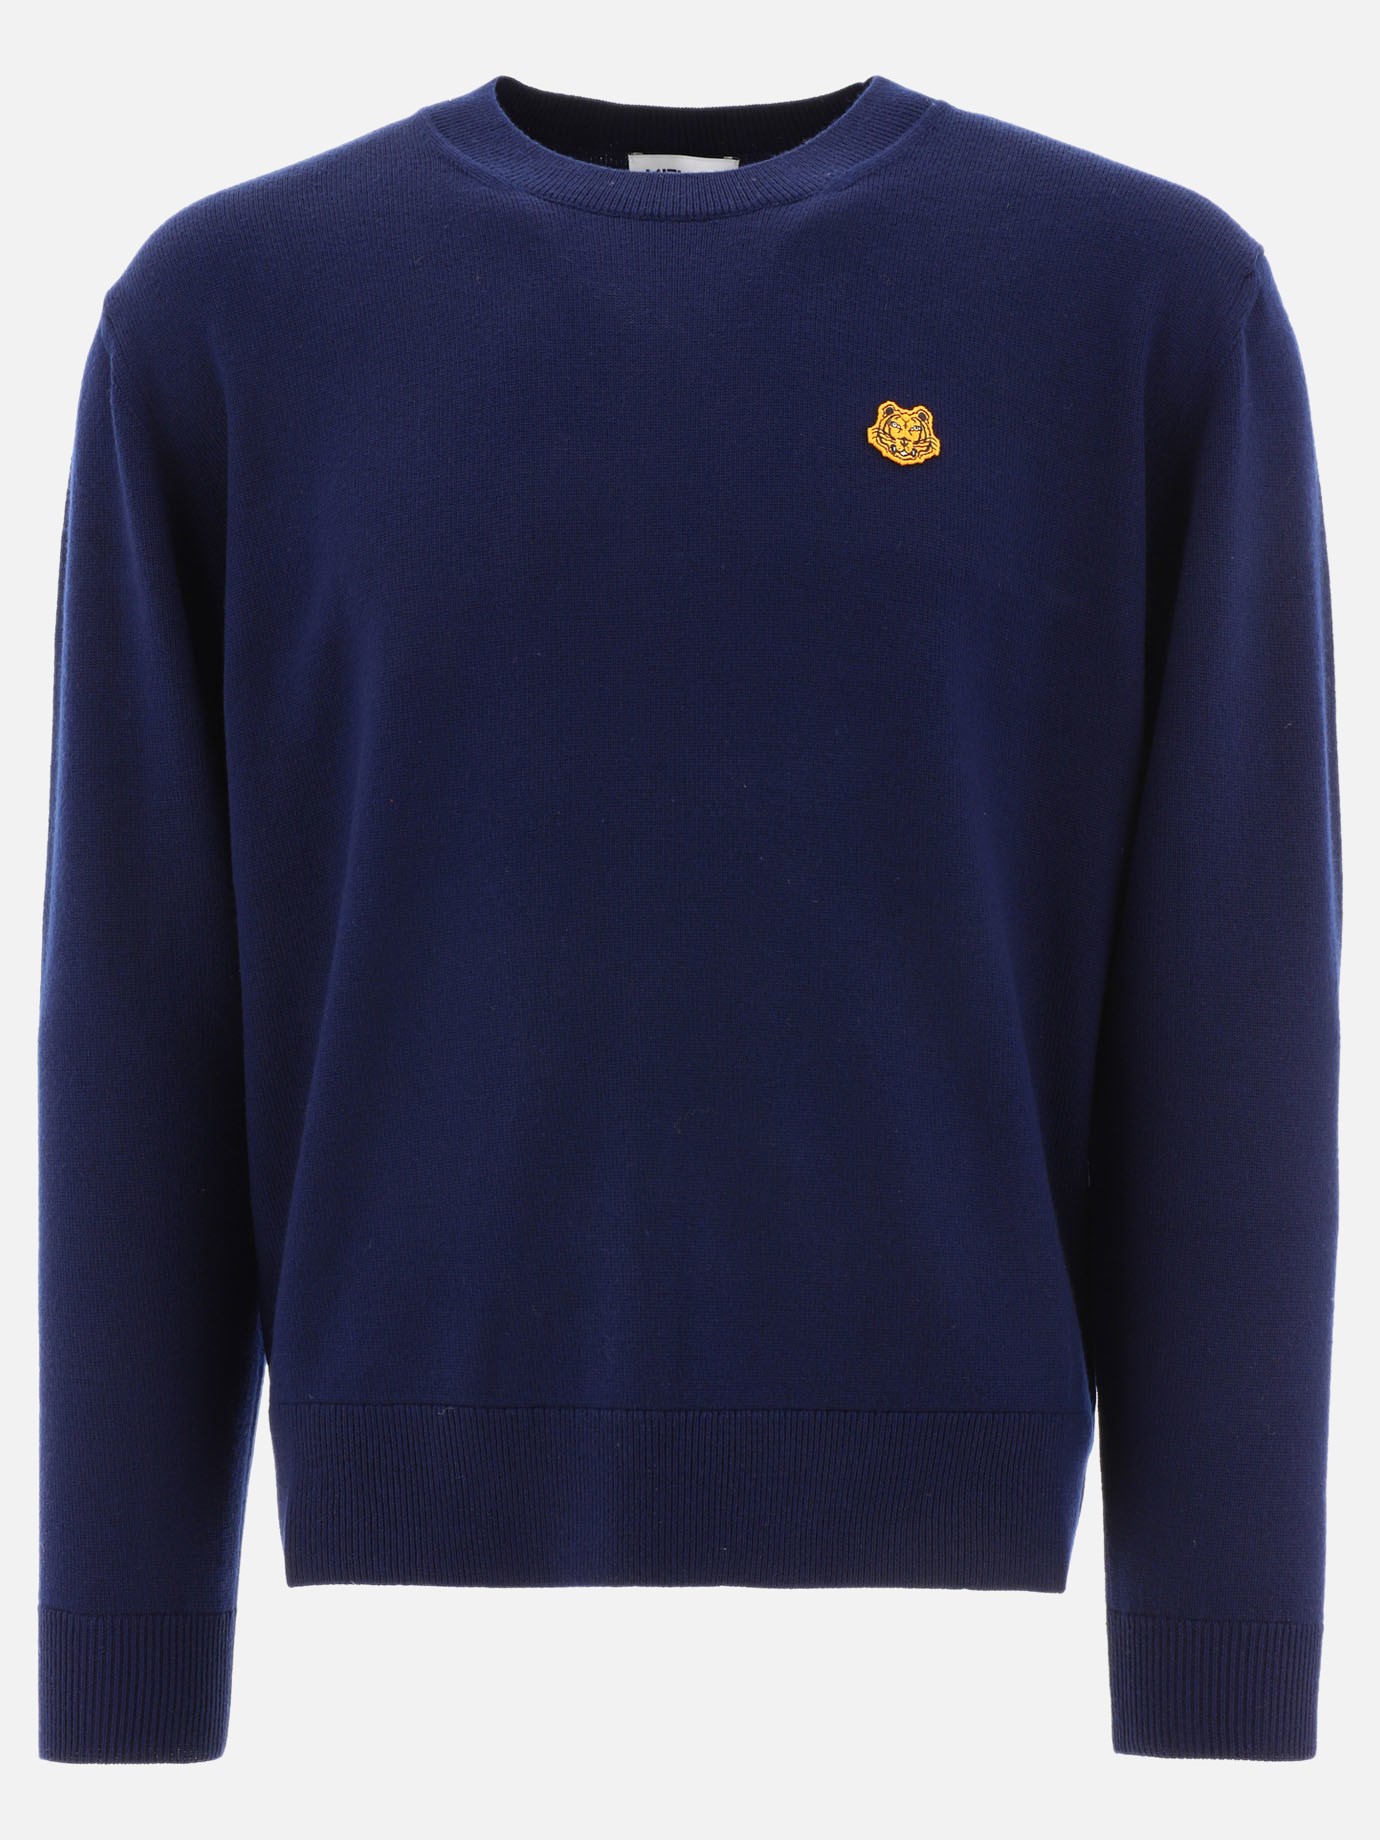  Tiger Crest  sweaterby Kenzo - 3